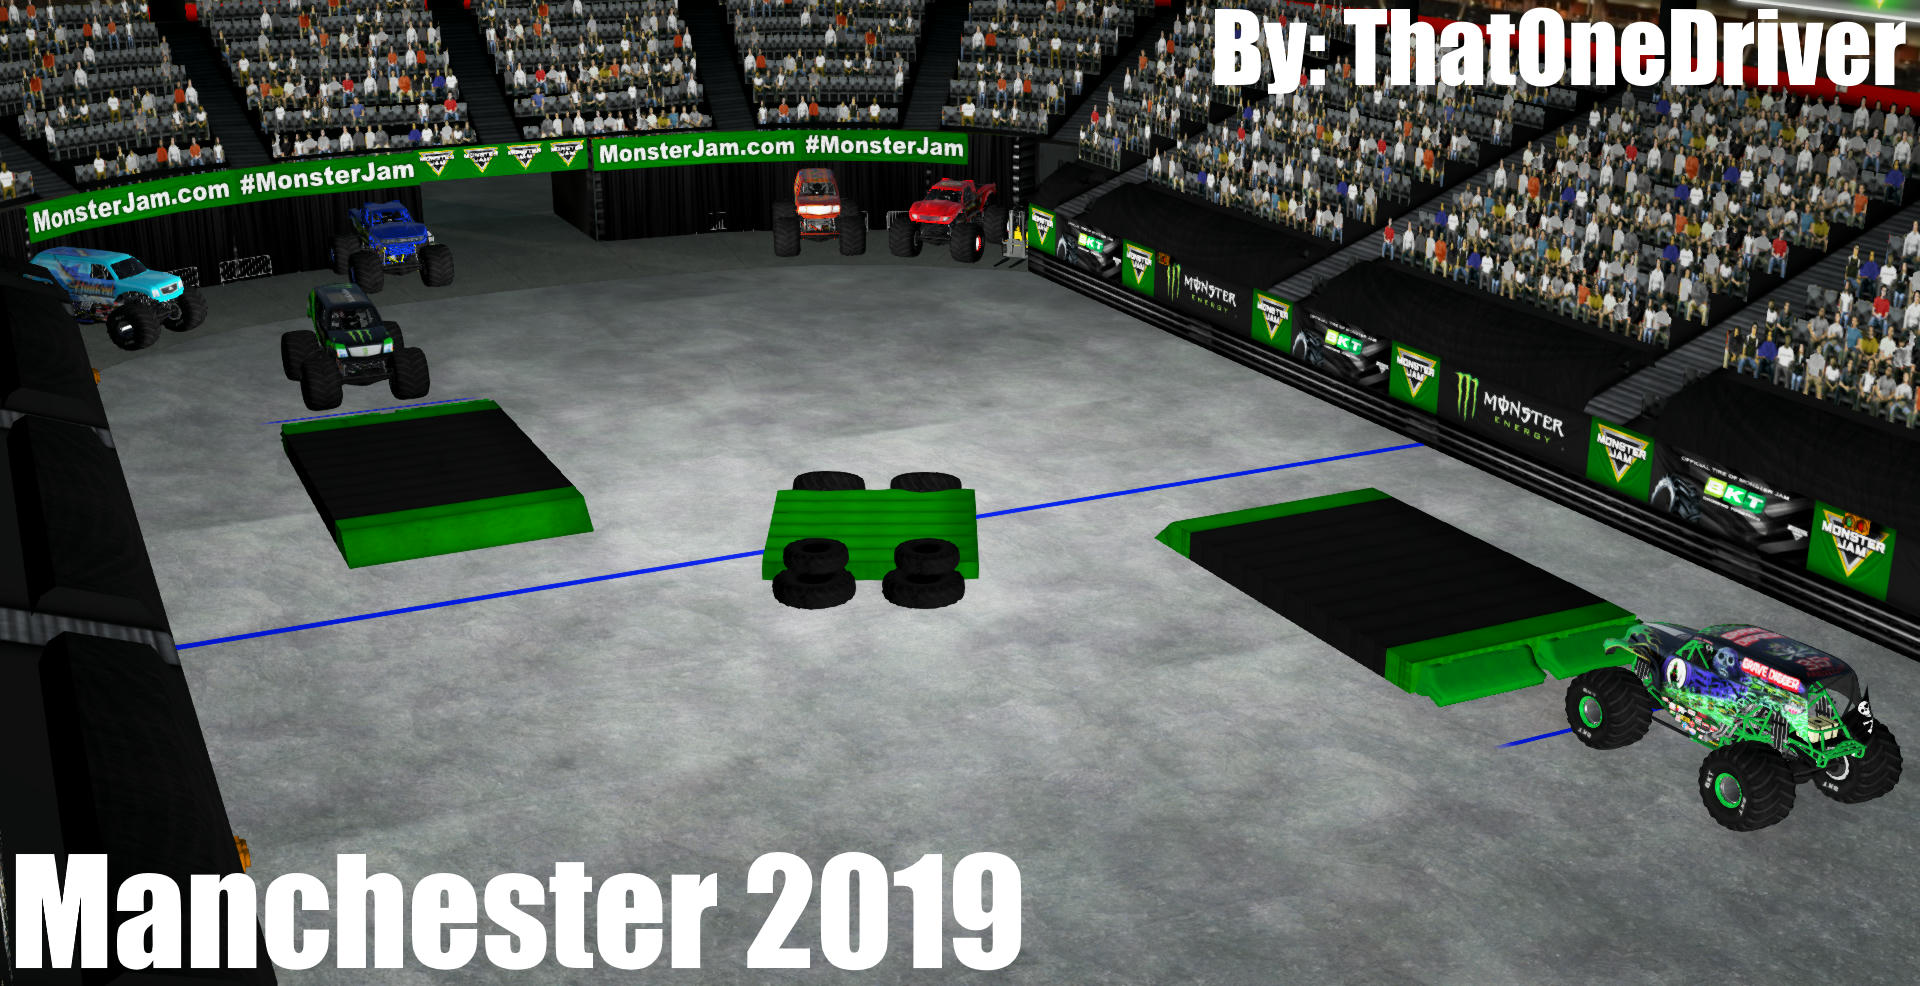 More information about "Manchester 2019 Replica & Manchester 2019 Custom"